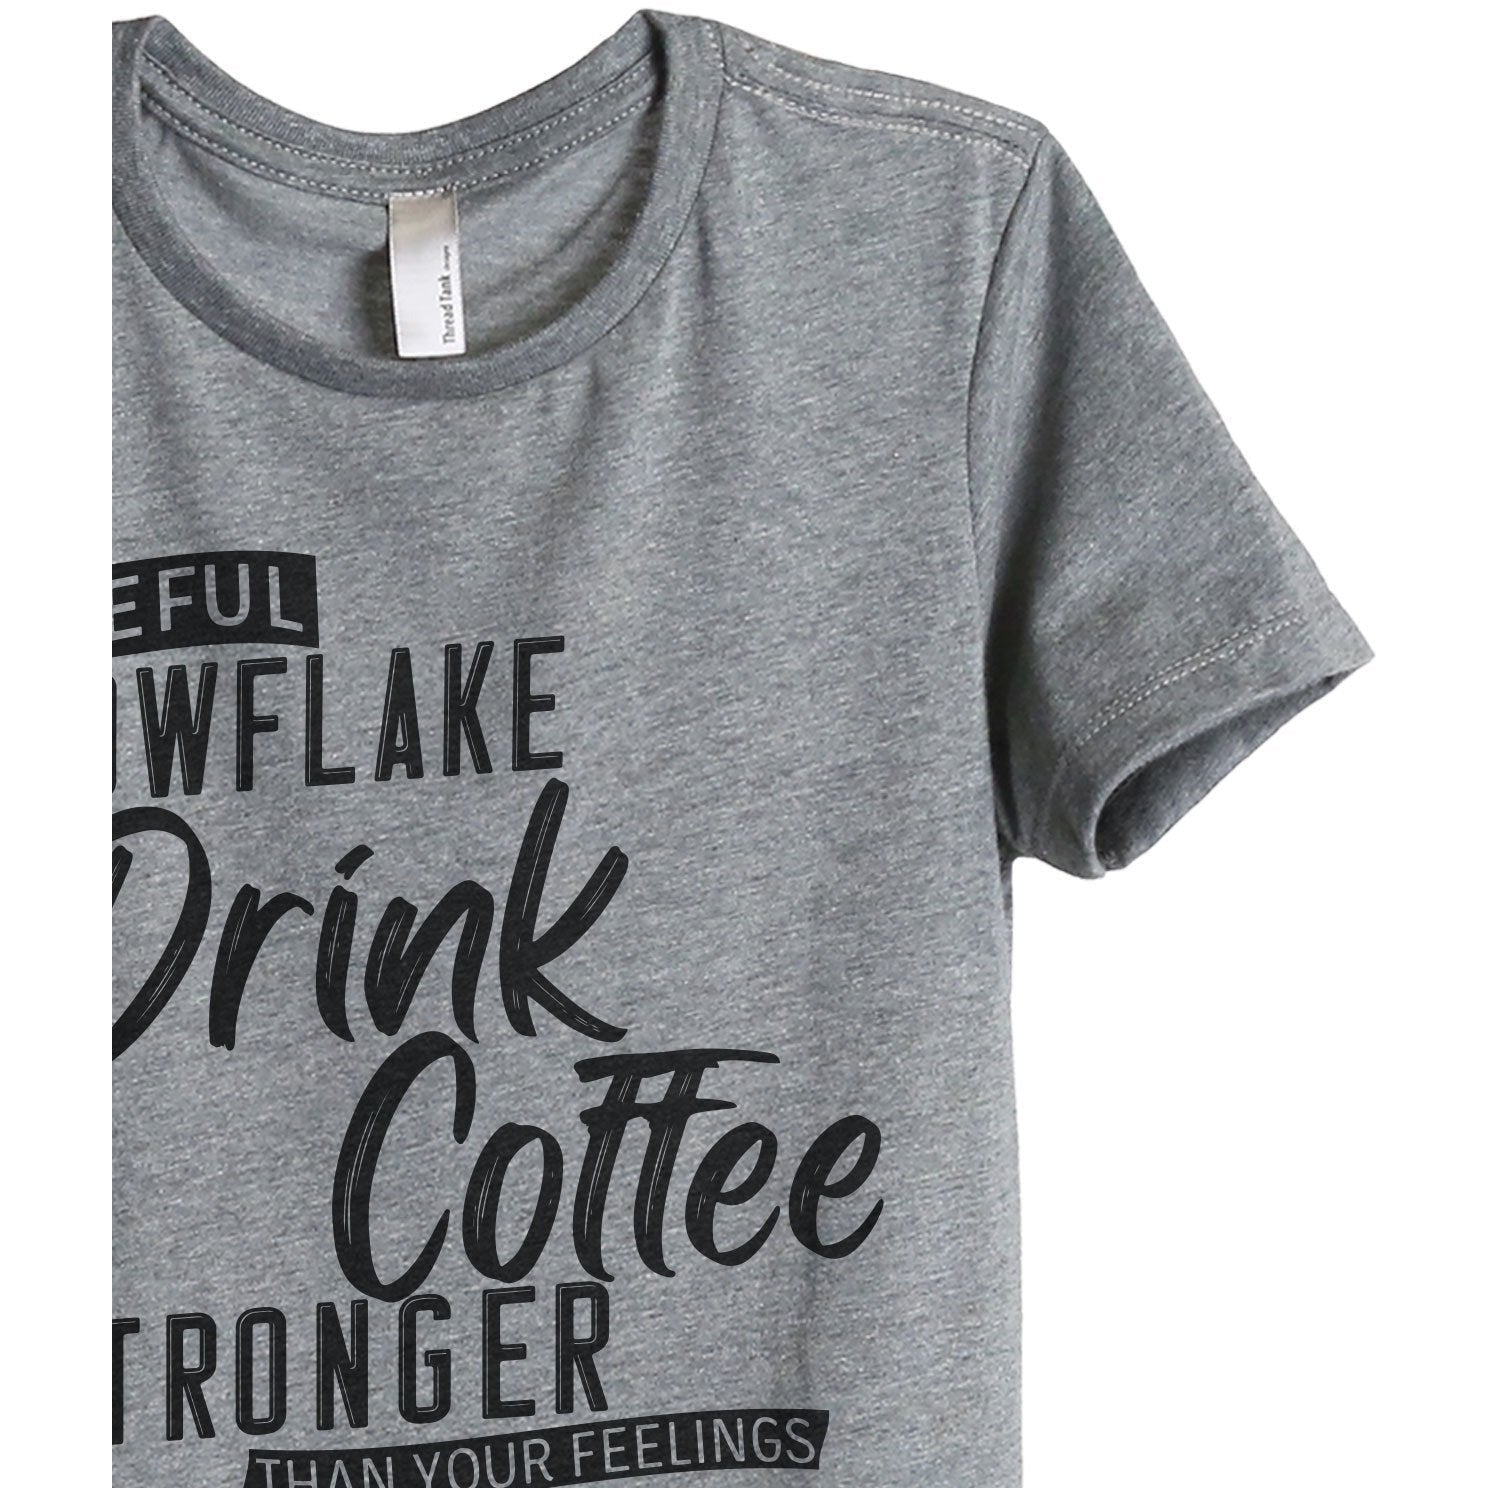 Careful Snowflake...I Drink Coffee Stronger Than Your Feelings Women's Relaxed Crewneck T-Shirt Top Tee Heather Grey Zoom Details
